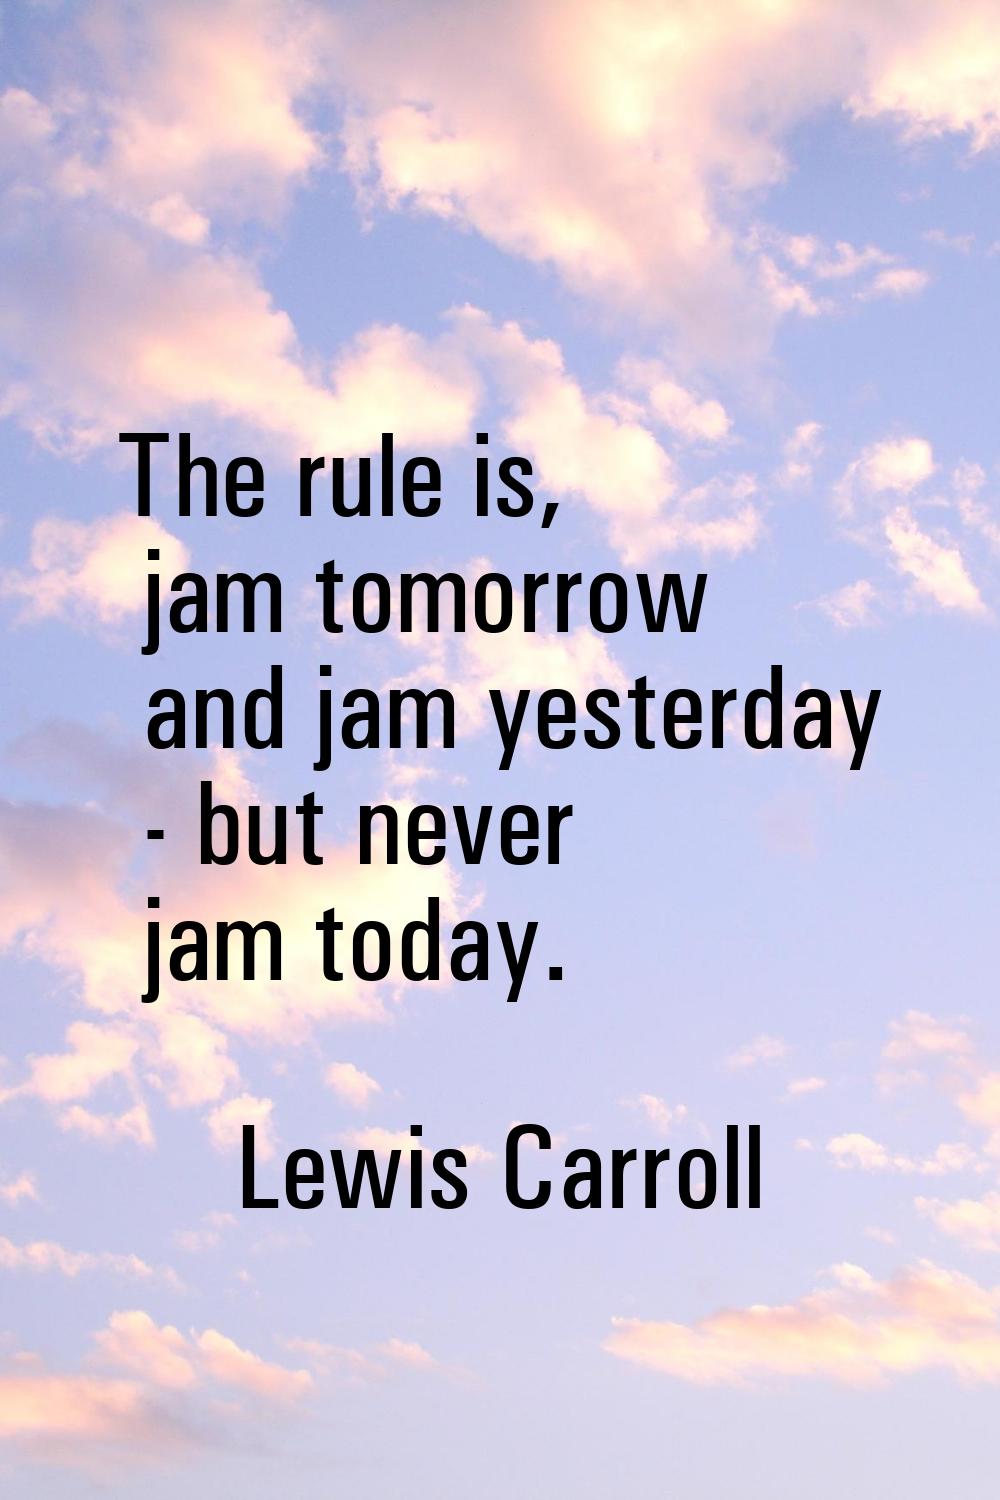 The rule is, jam tomorrow and jam yesterday - but never jam today.